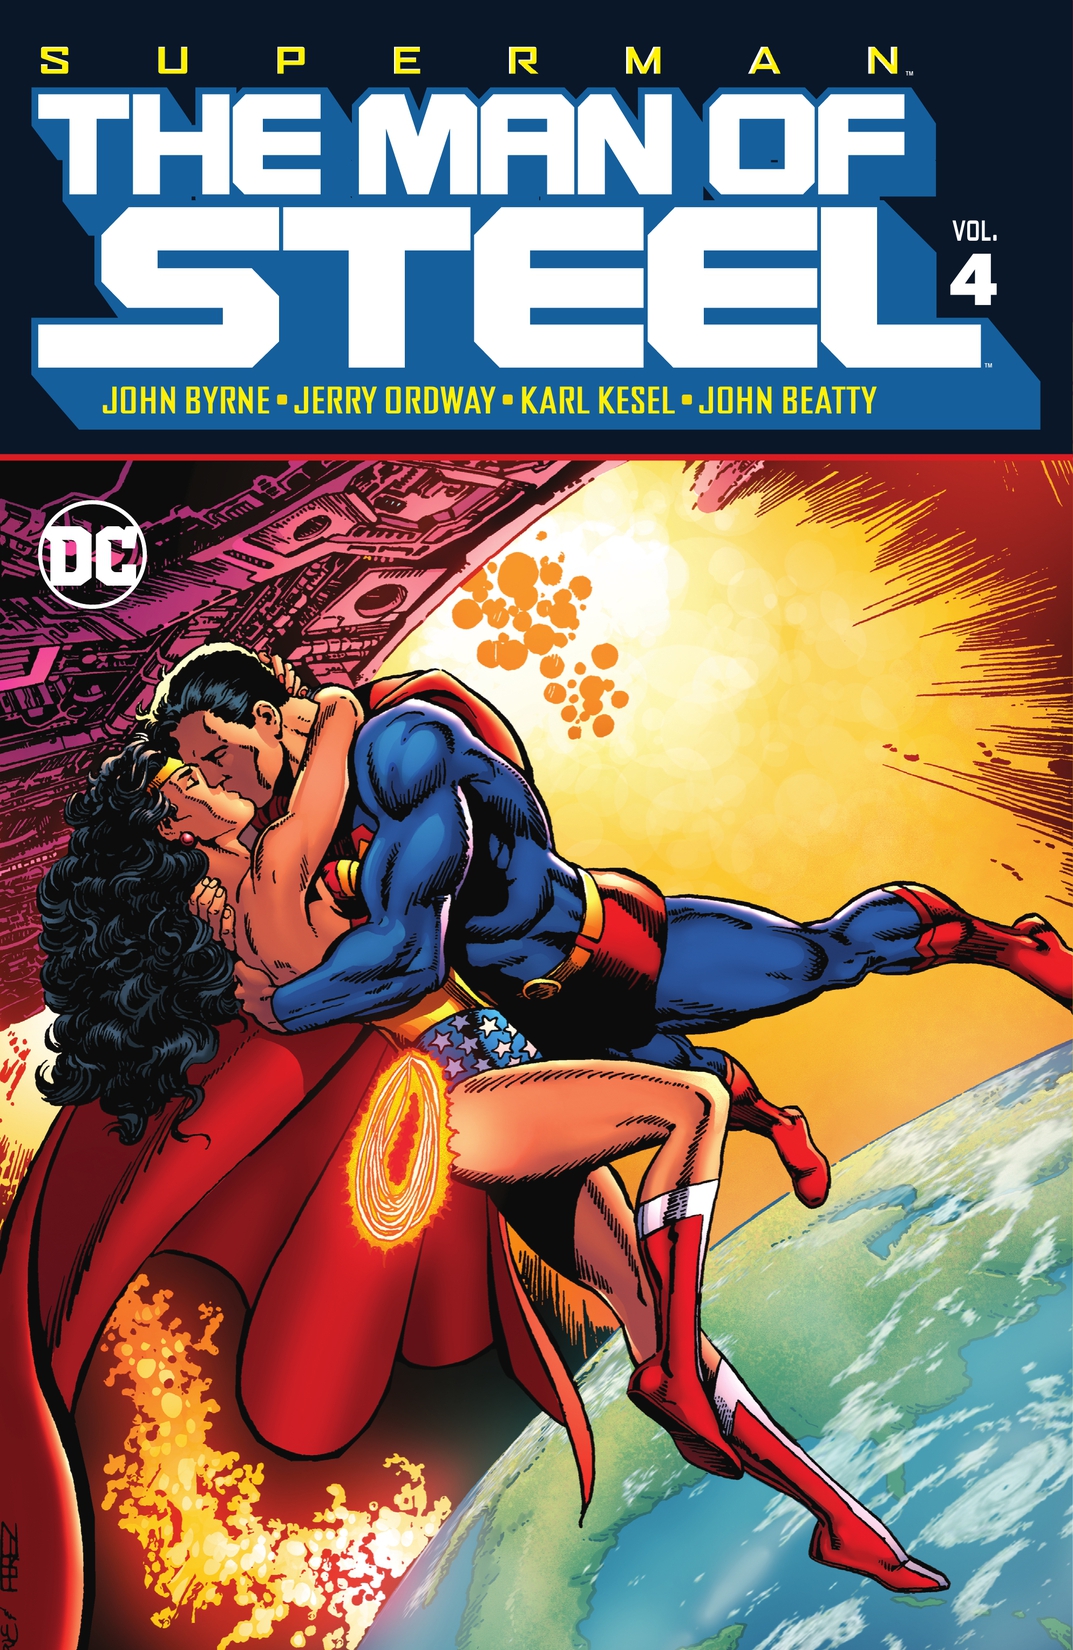 Superman: The Man of Steel Vol. 4 preview images